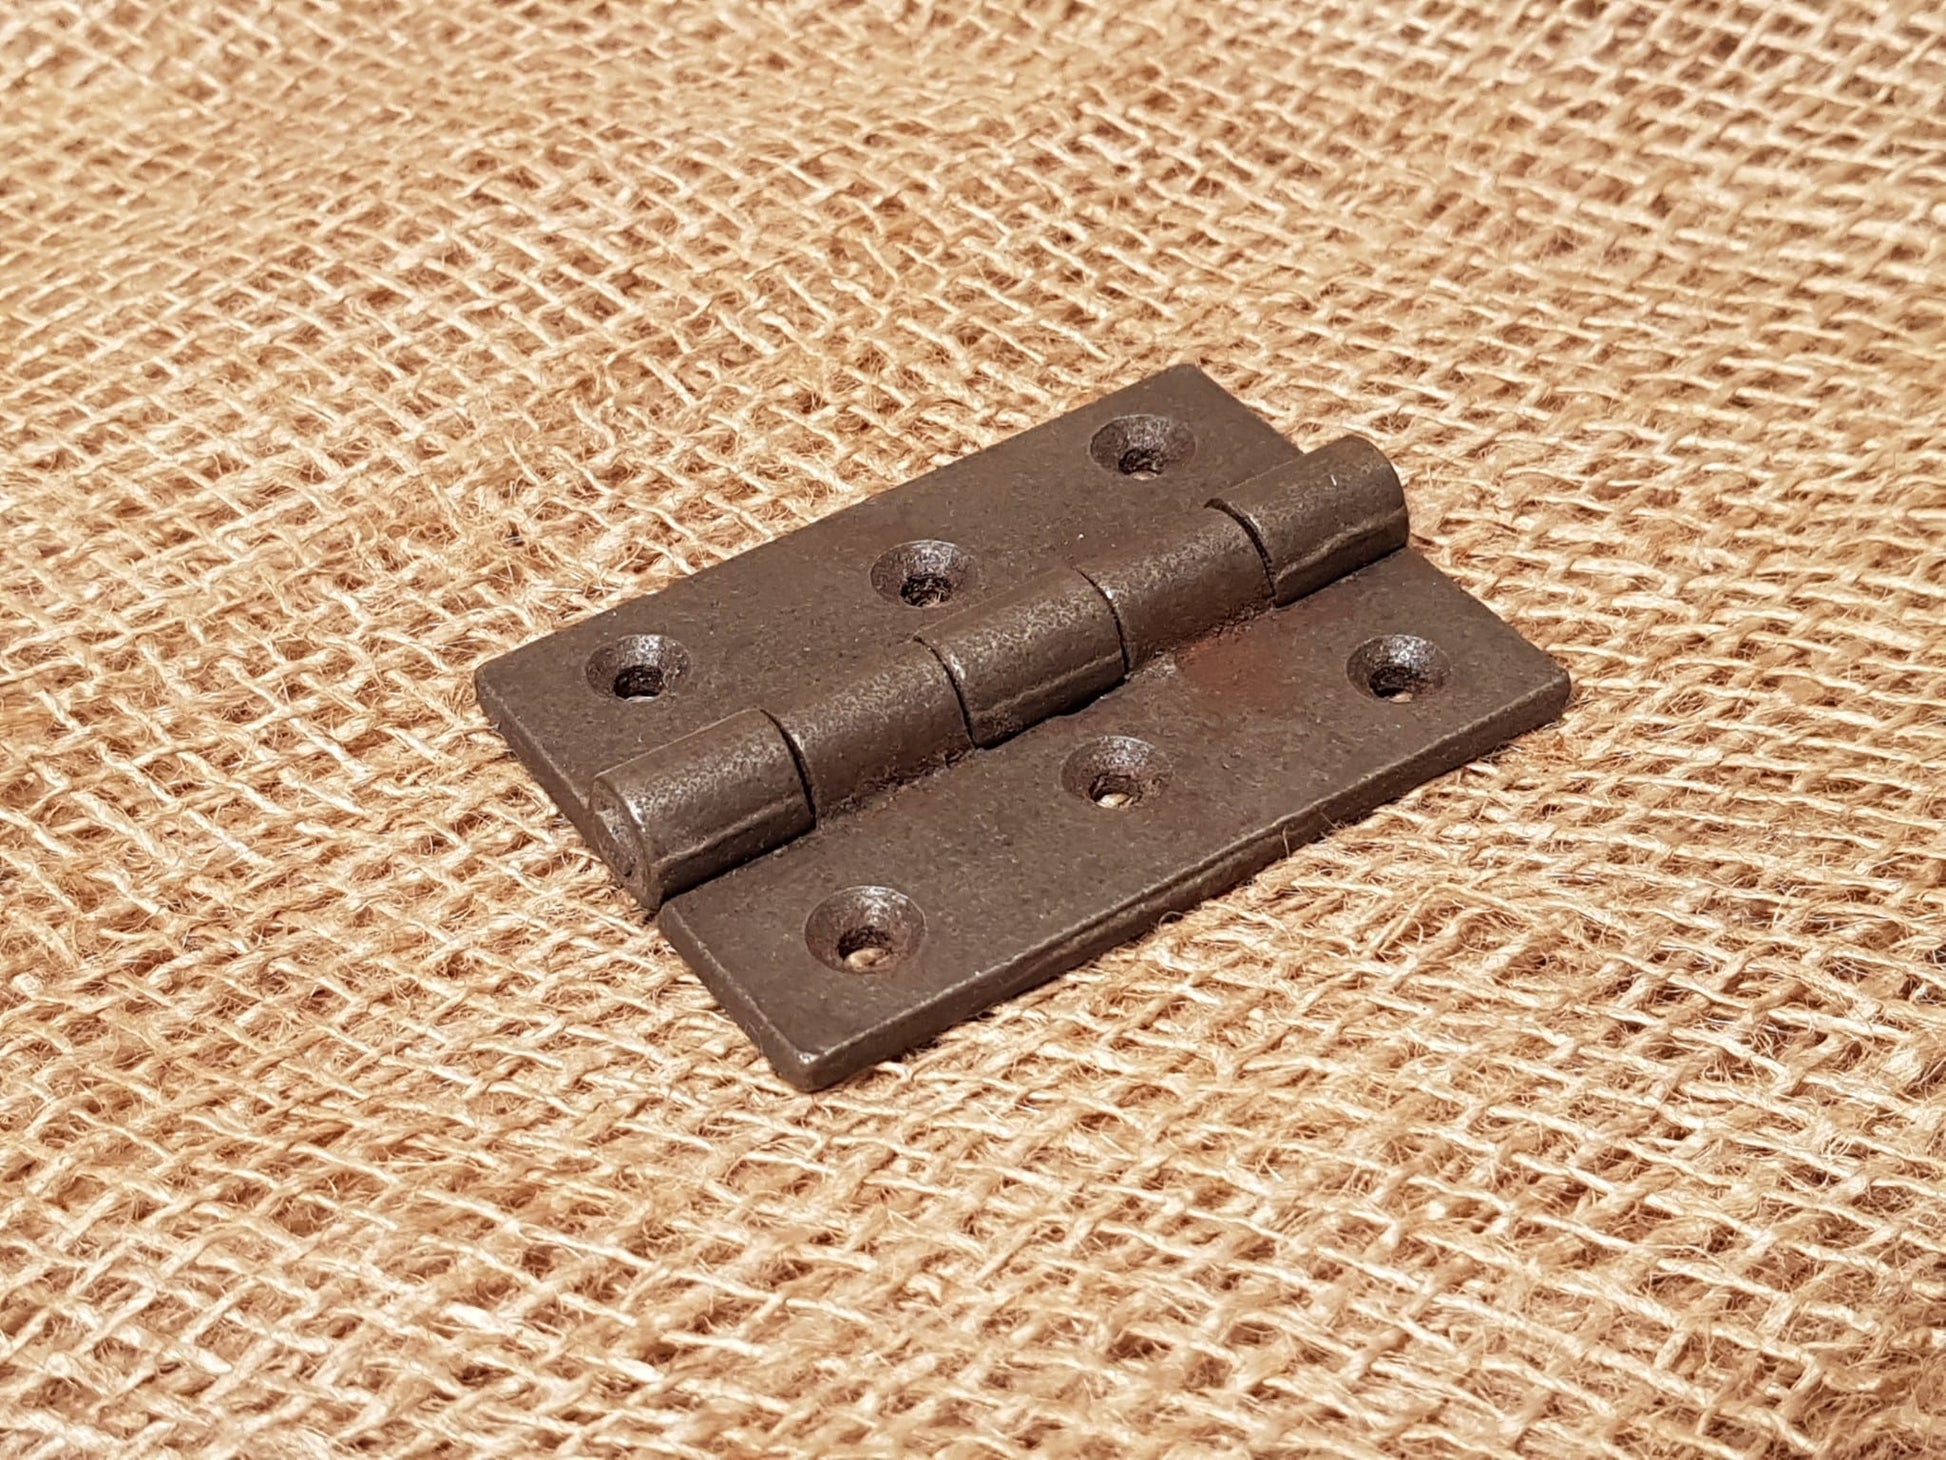 Butt Hinge Cast Iron 3" - Spearhead Collection - Hinges - Country Farmhouse, Door Hardware, Hinges, Millwork Hardware, Steel